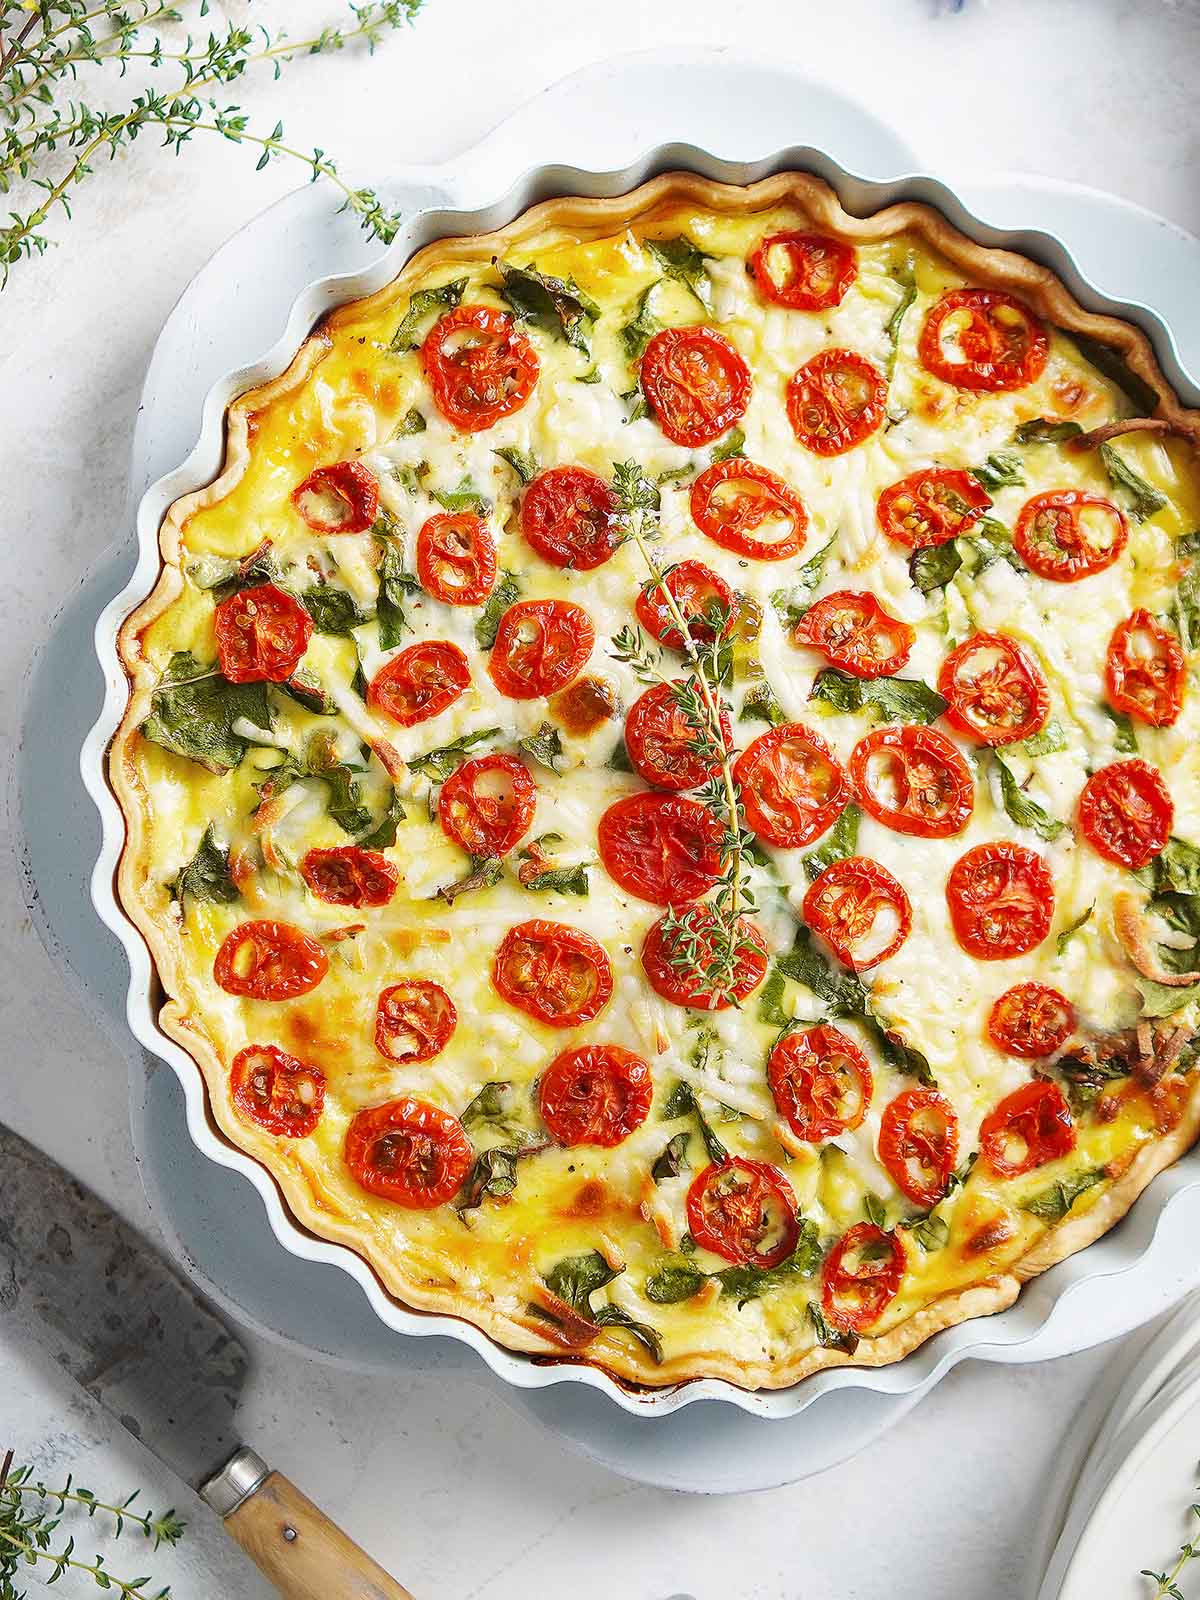 A baked quiche with sliced tomatoes on top.